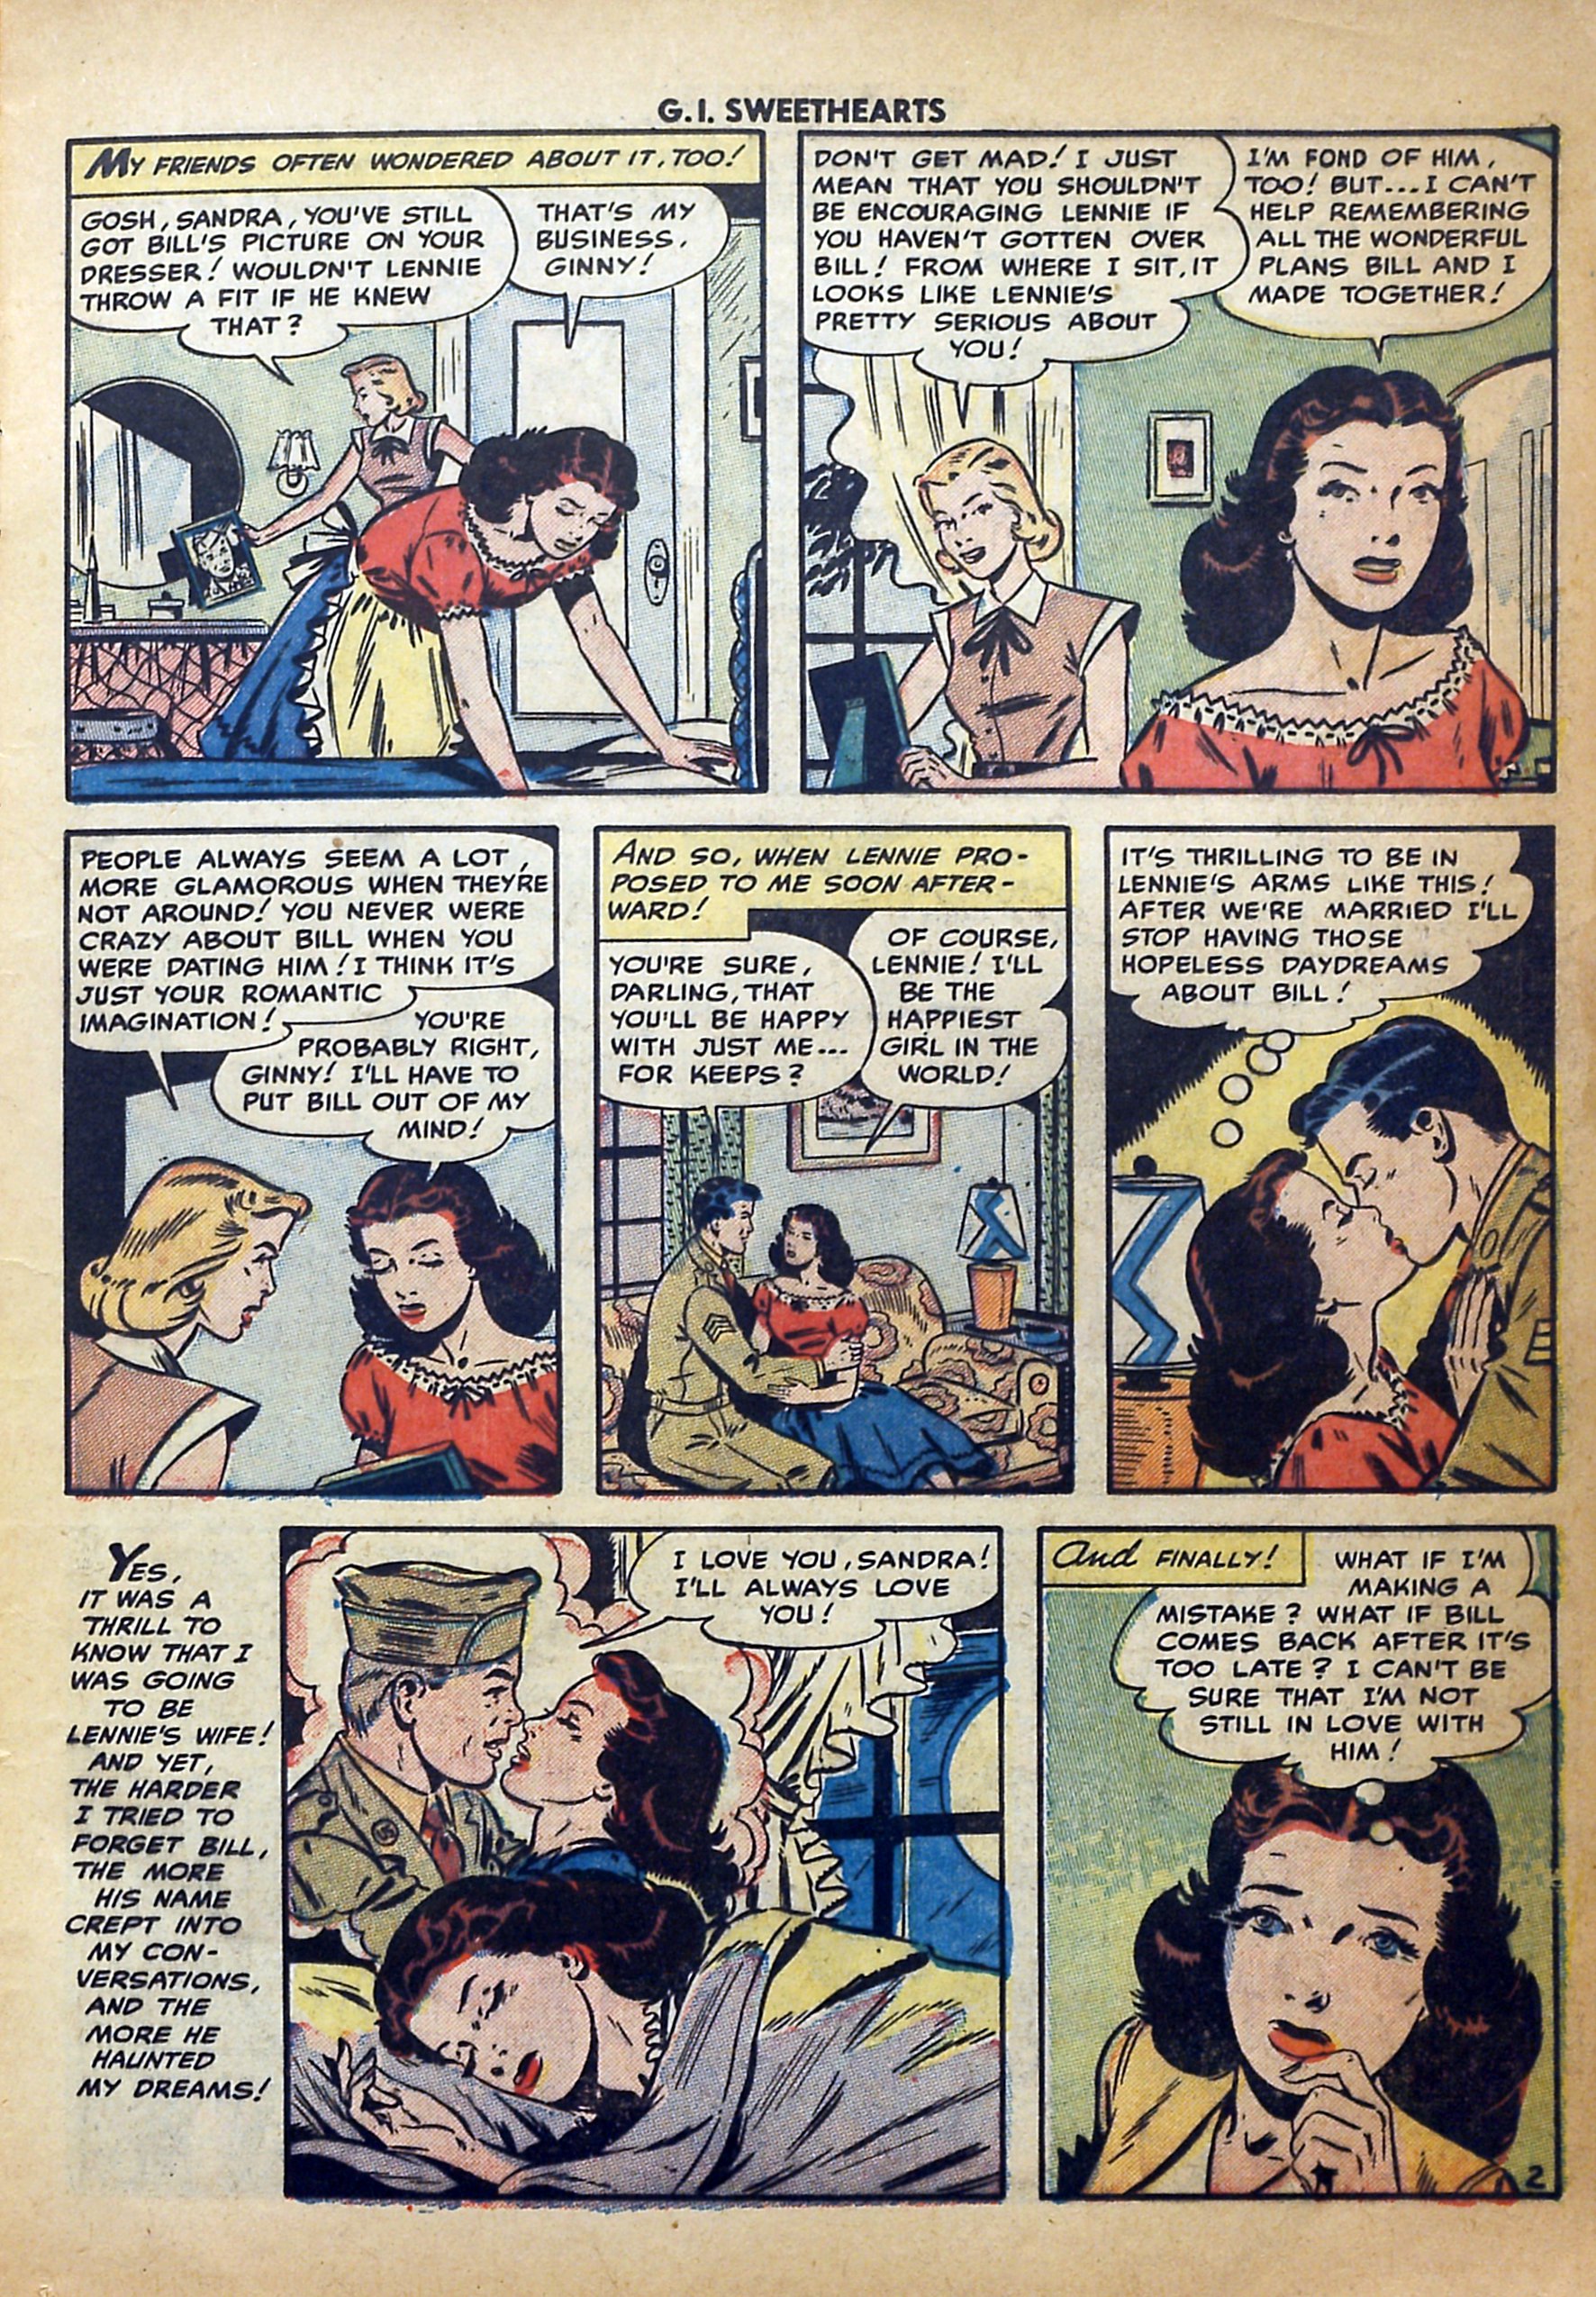 Read online G.I. Sweethearts comic -  Issue #43 - 13